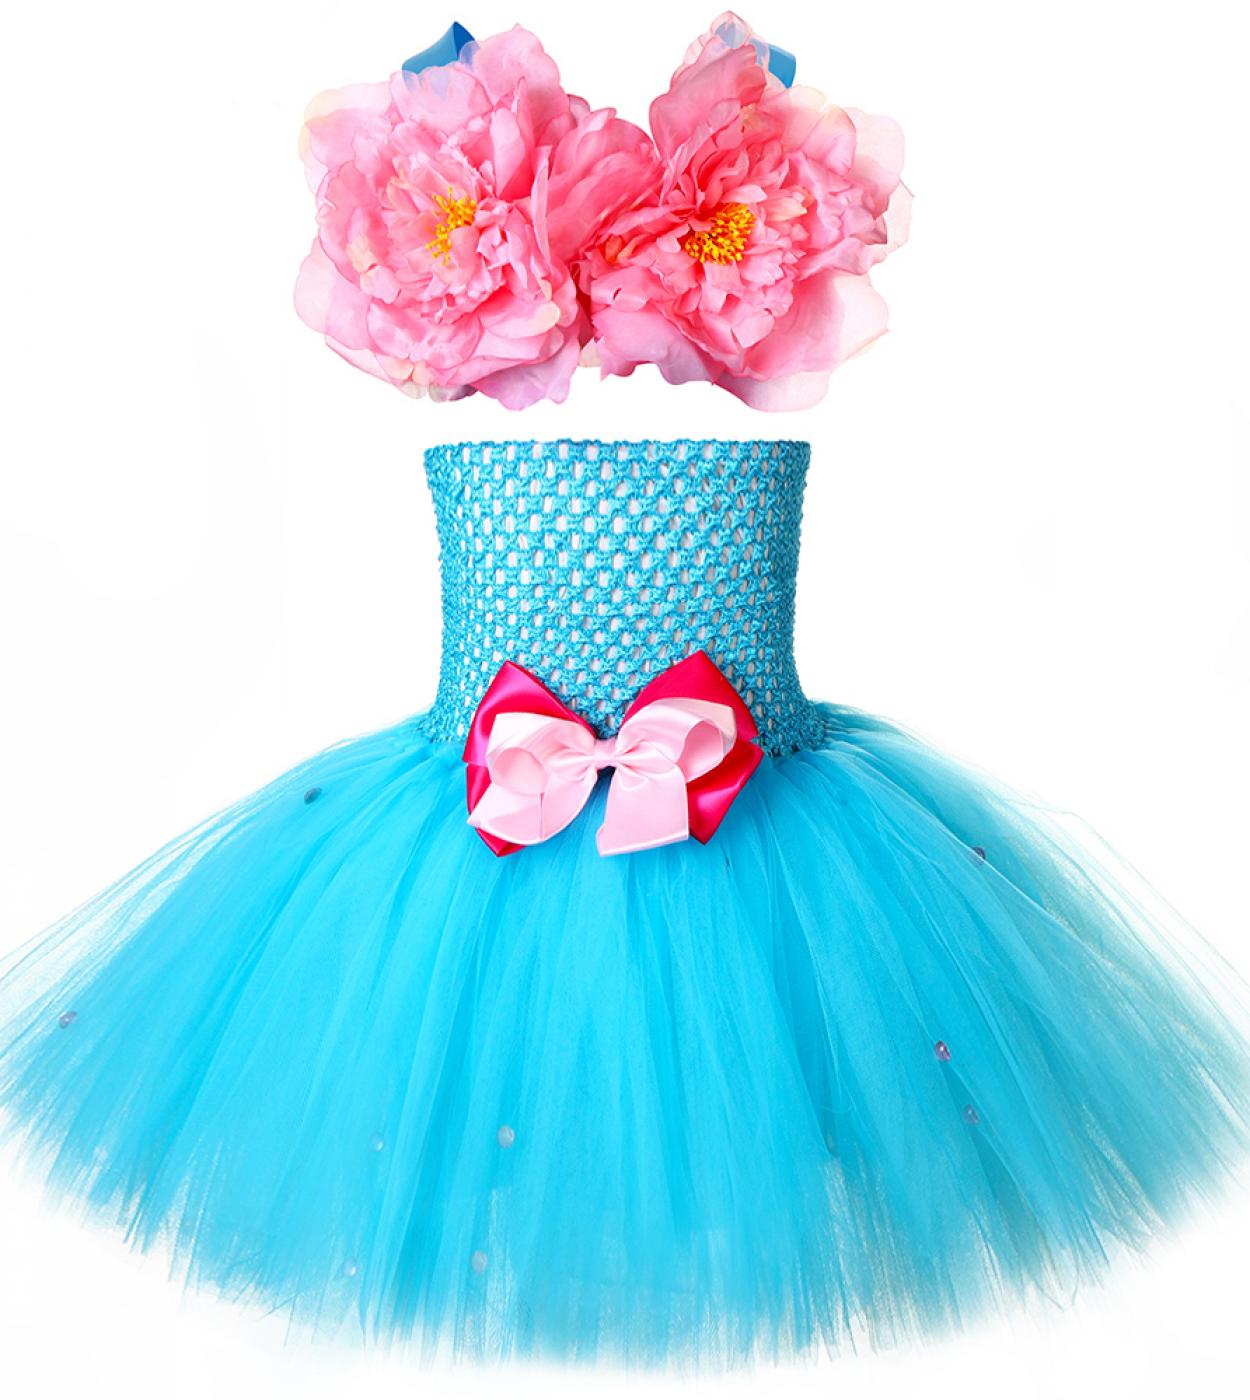 Flower Mermaid Princess Dress For Baby Girls Birthday Outfit Toddler Kids Sea Maid Costume Under The Sea Tutu Set Photo 